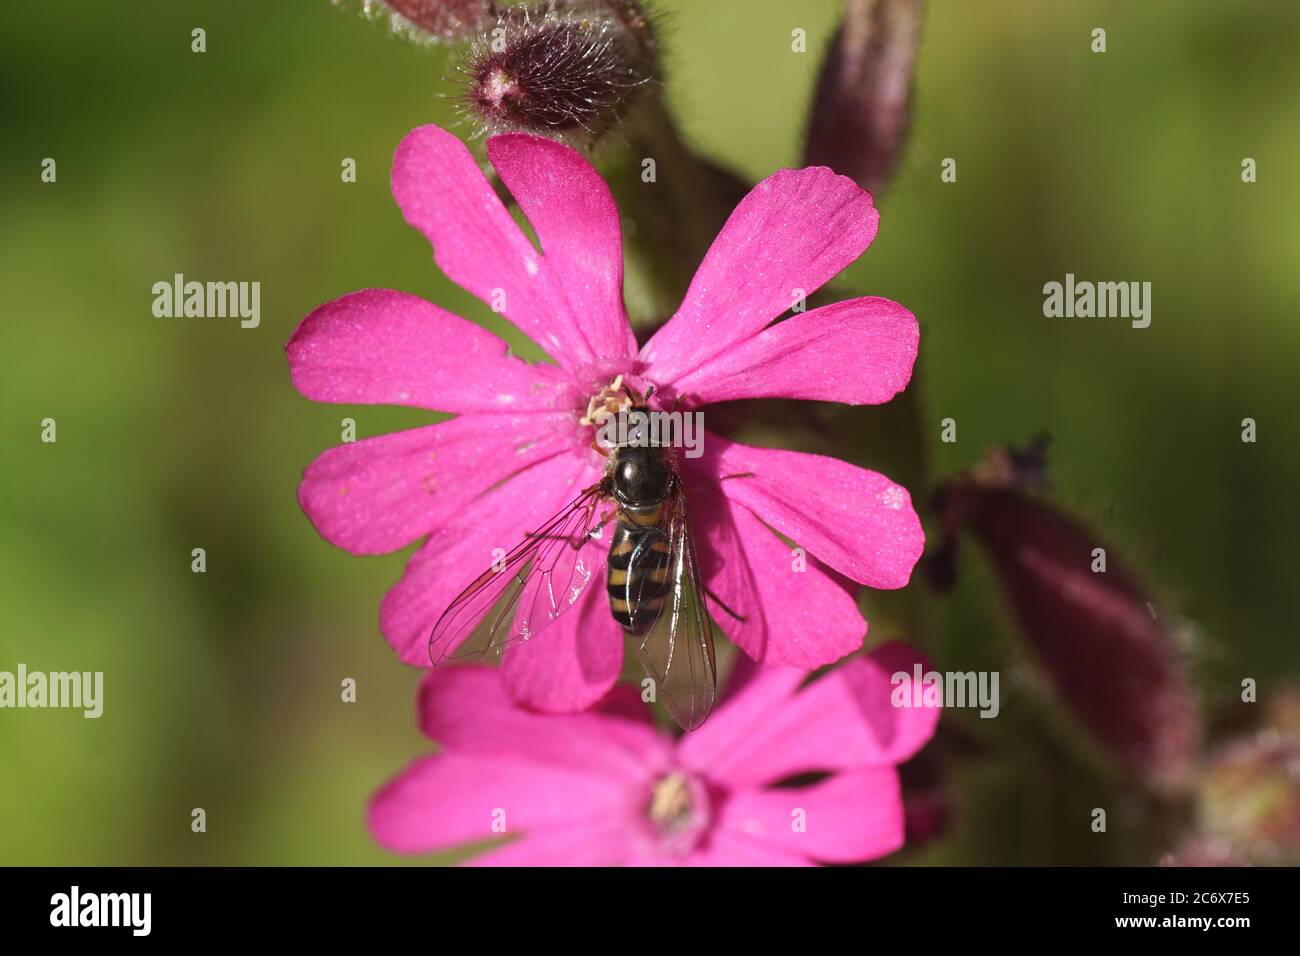 Hoverfly Meliscaeva auricollis, family Syrphidae on a flower of a red campion, red catchfly (Silene dioica), pink family, (Caryophyllaceae). Spring Stock Photo